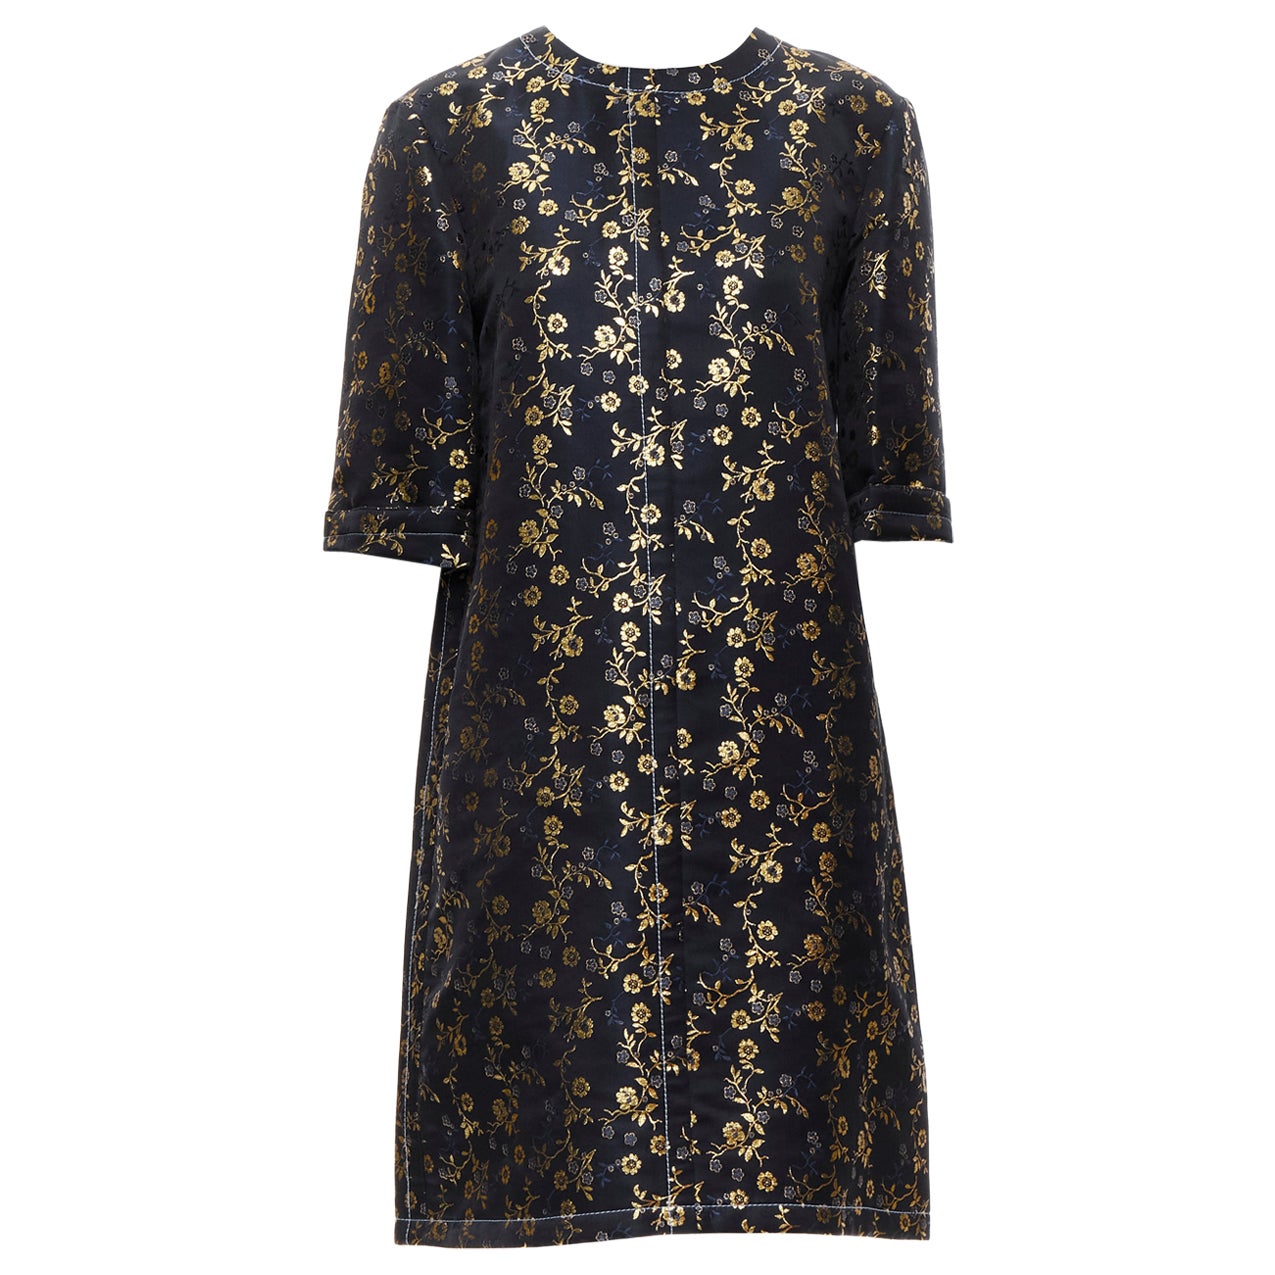 MARNI 2019 black gold blue floral jacquard cuffed sleeve trapeze dress IT40 S For Sale